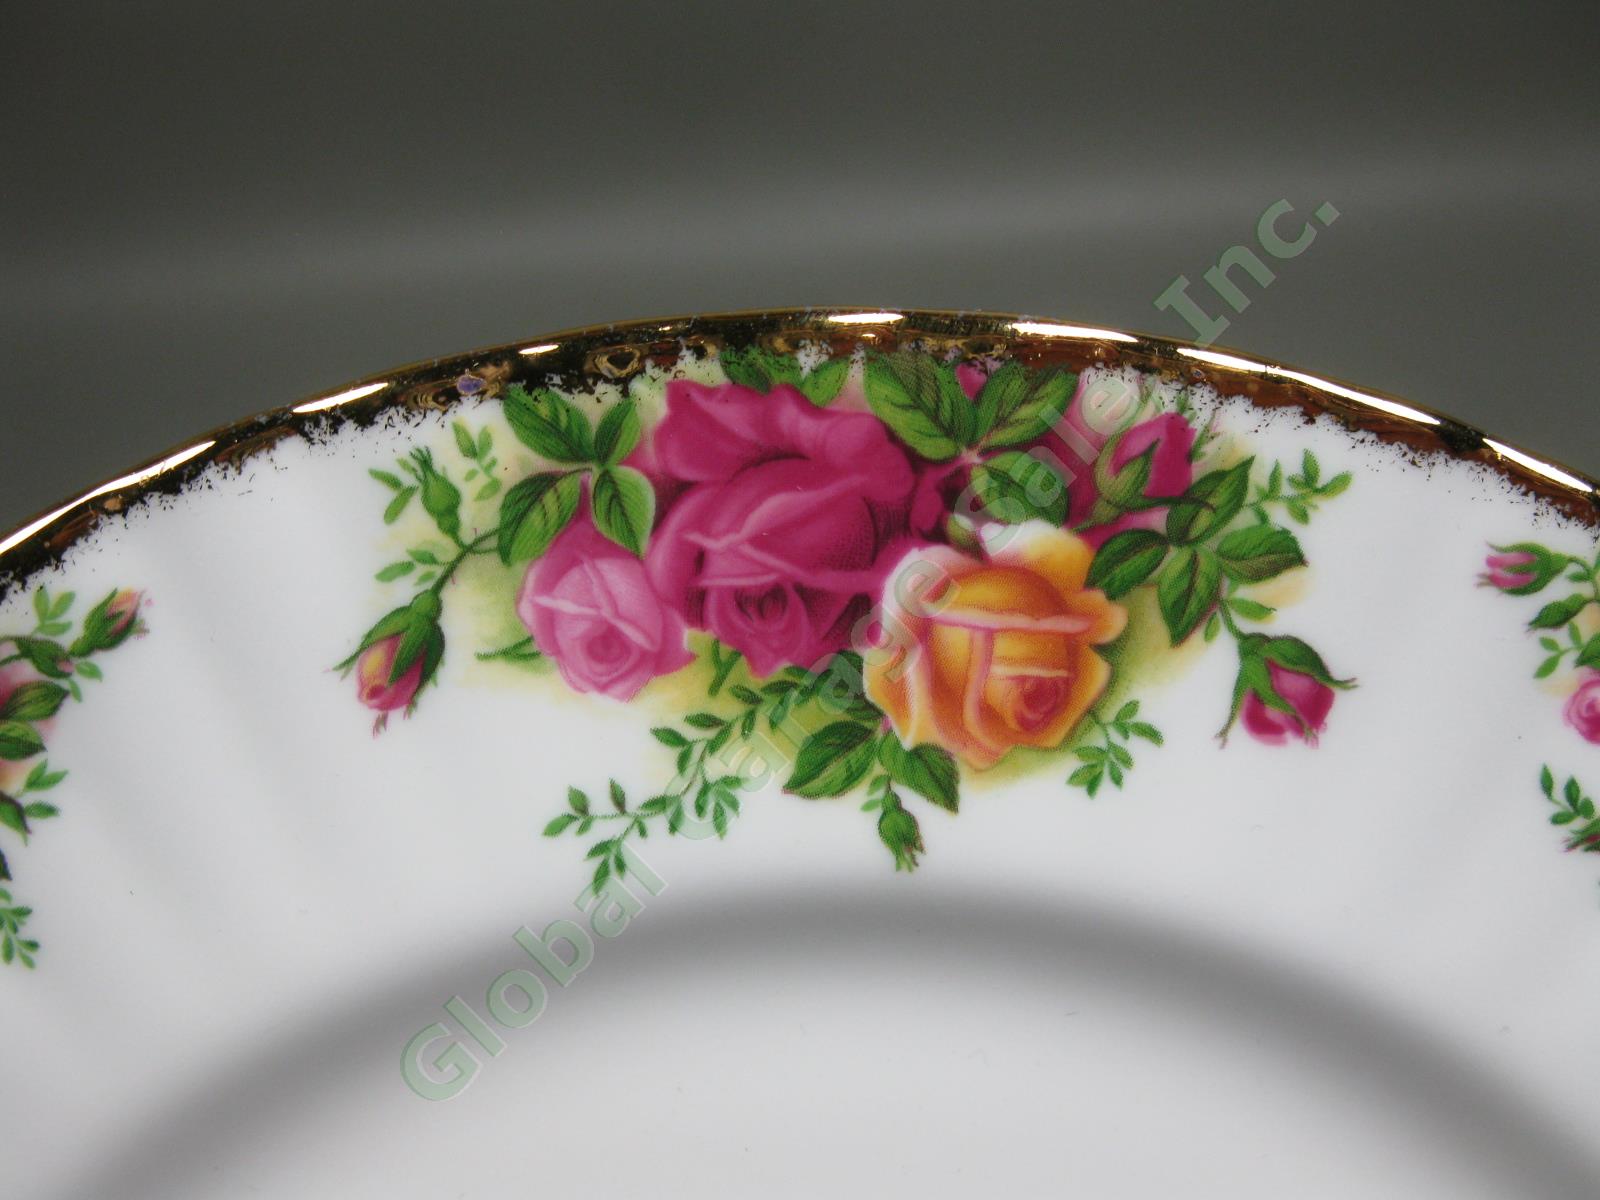 4 Royal Albert Old Country Roses Place Settings Serving Bowl Platter Plate Set 1